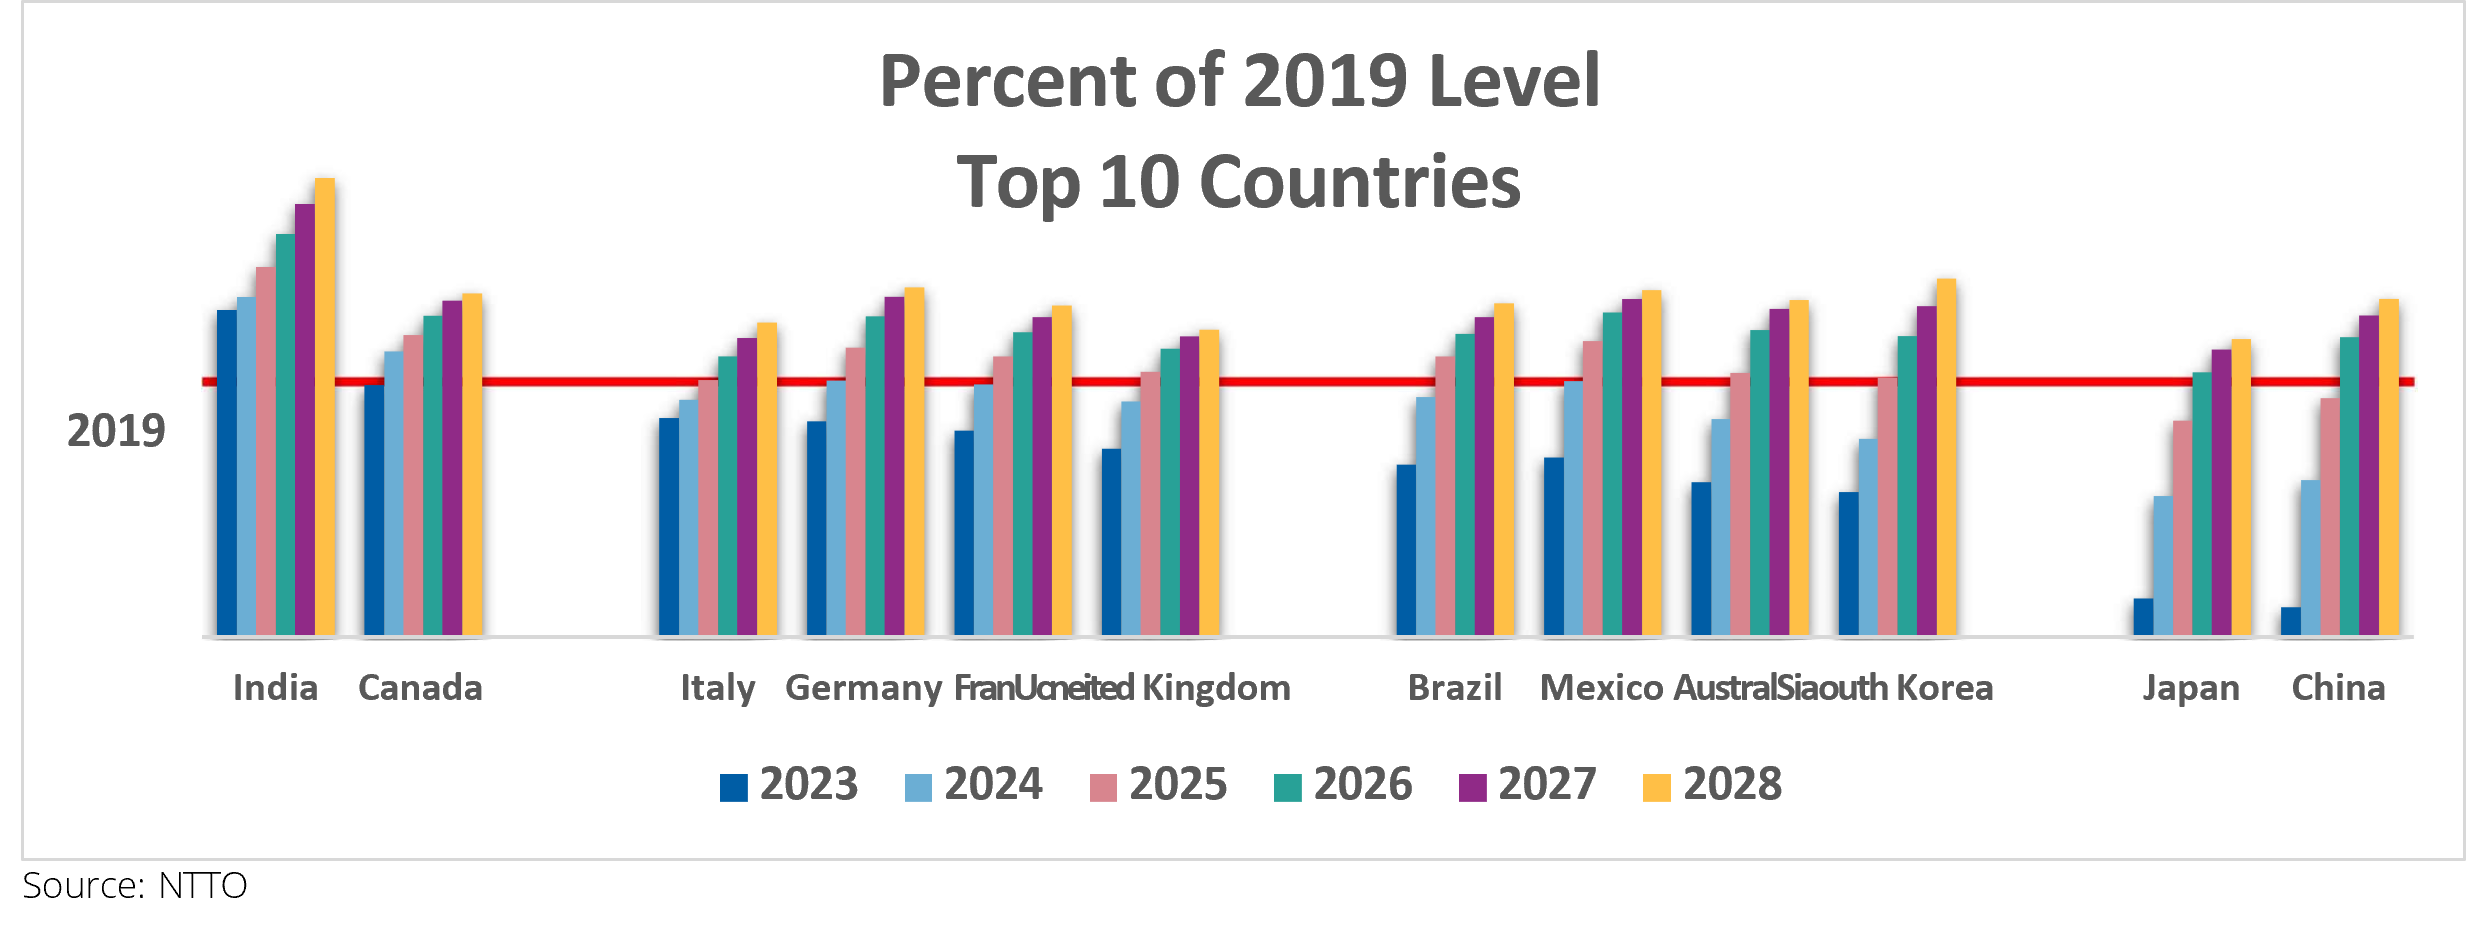 Data visualization of the percent of 2019 visitor level for top ten countries.